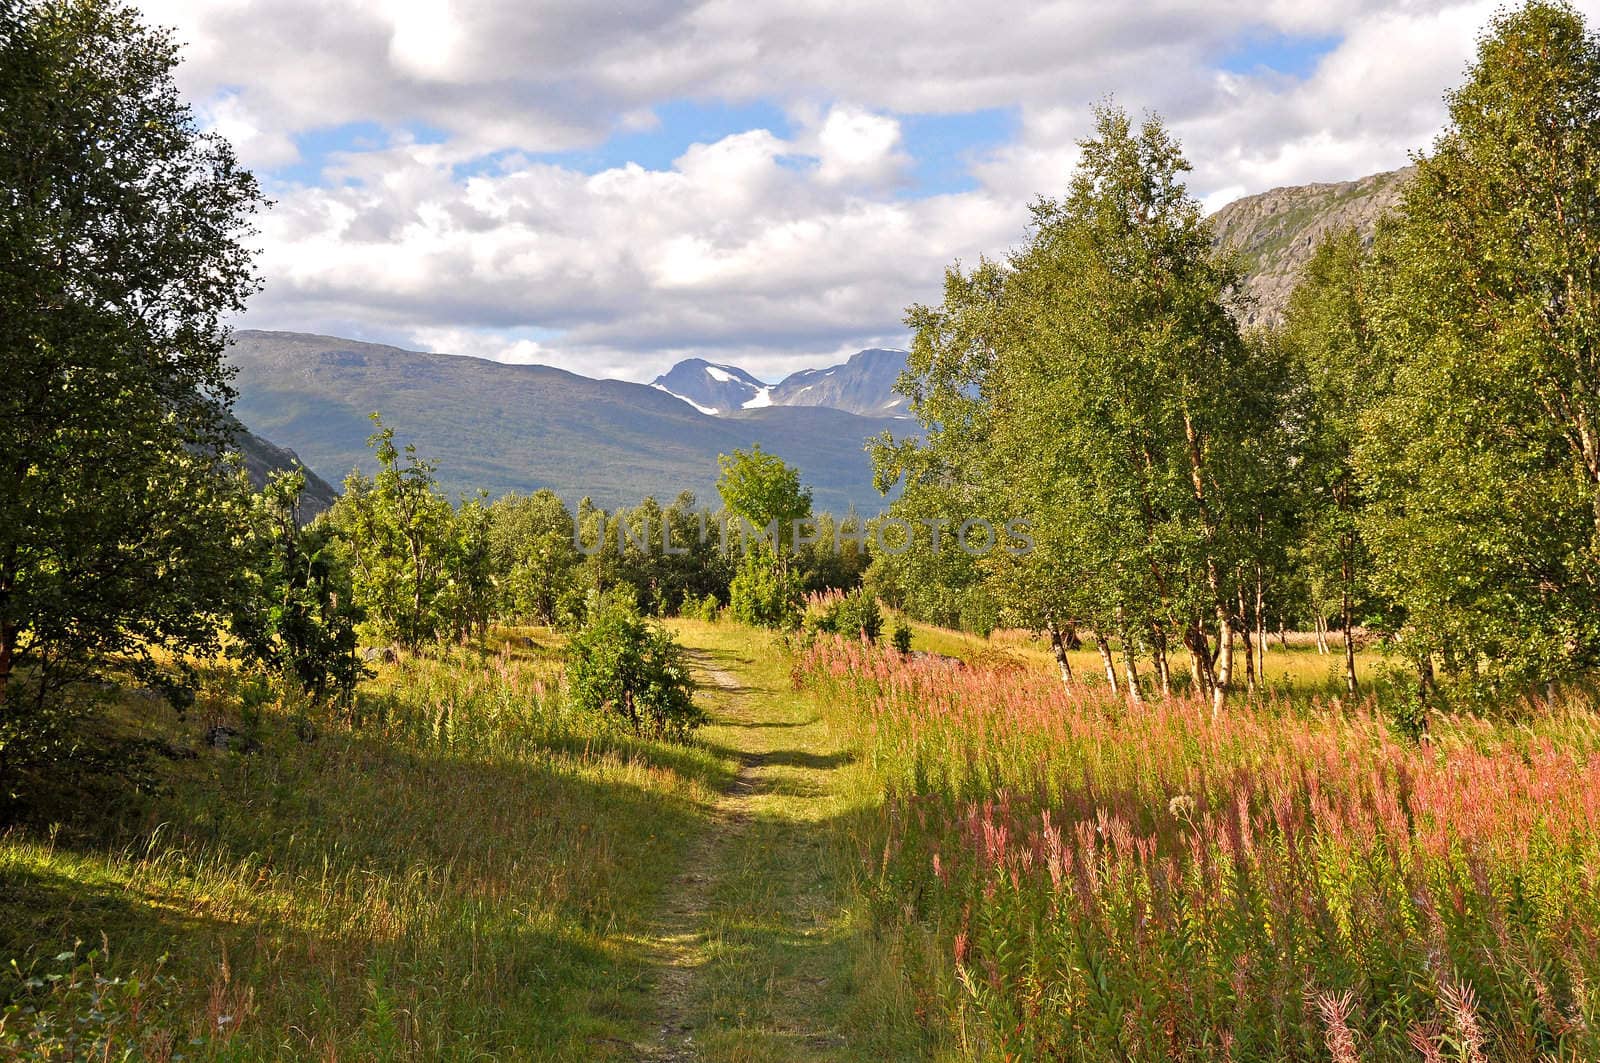 A beautiful part of the walking trail "Rallarveien" in northern Norway.